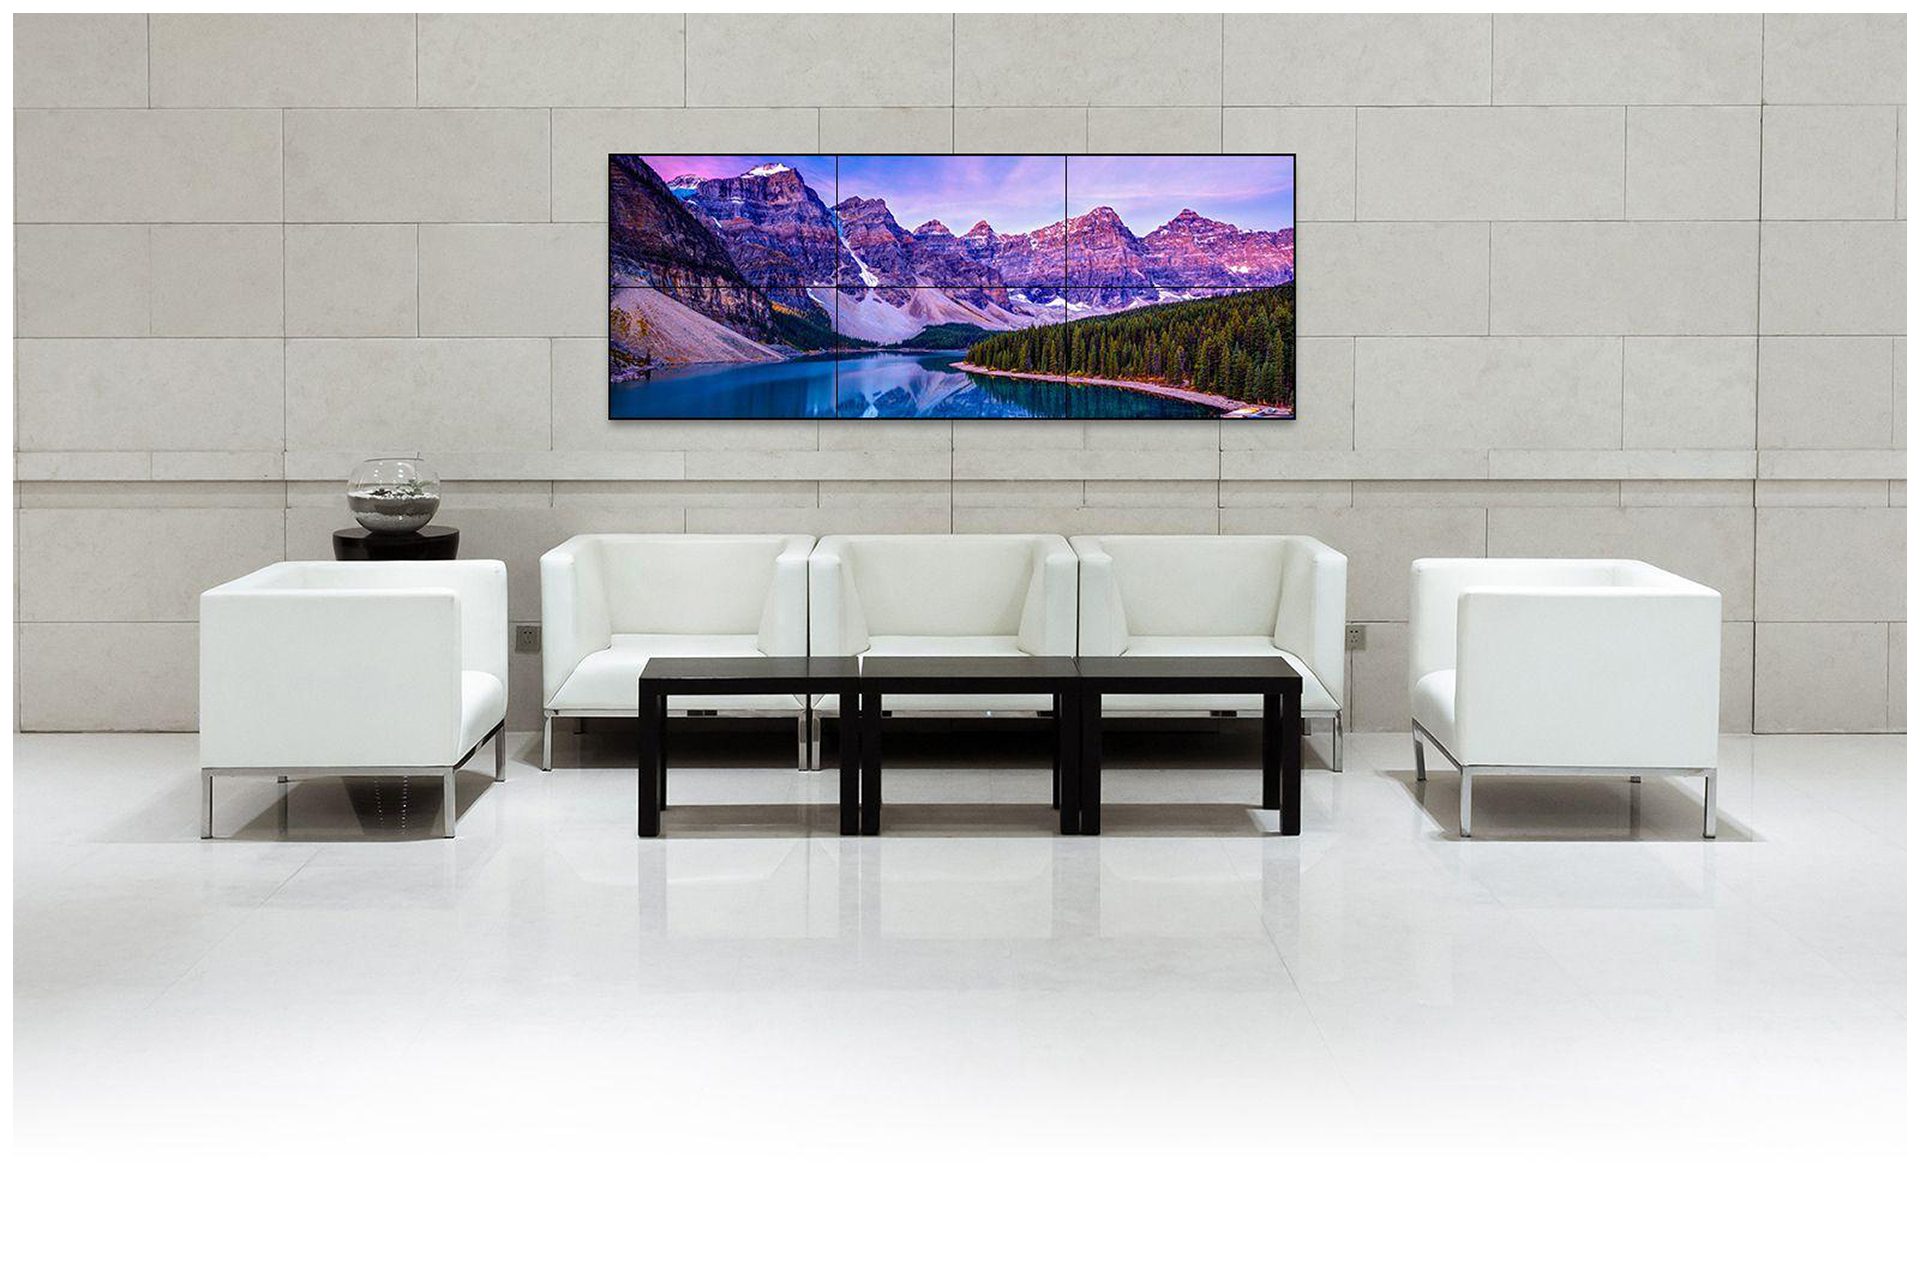 VIDEO WALL DIGITAL SIGNAGE FOR LOBBY PICTURE DISPLAYS  Above Custom size 3x2 Video Wall Display Signage delivers wide format photo slides for a media server.  Photos can be changed by simply adding new content to a photo folder.